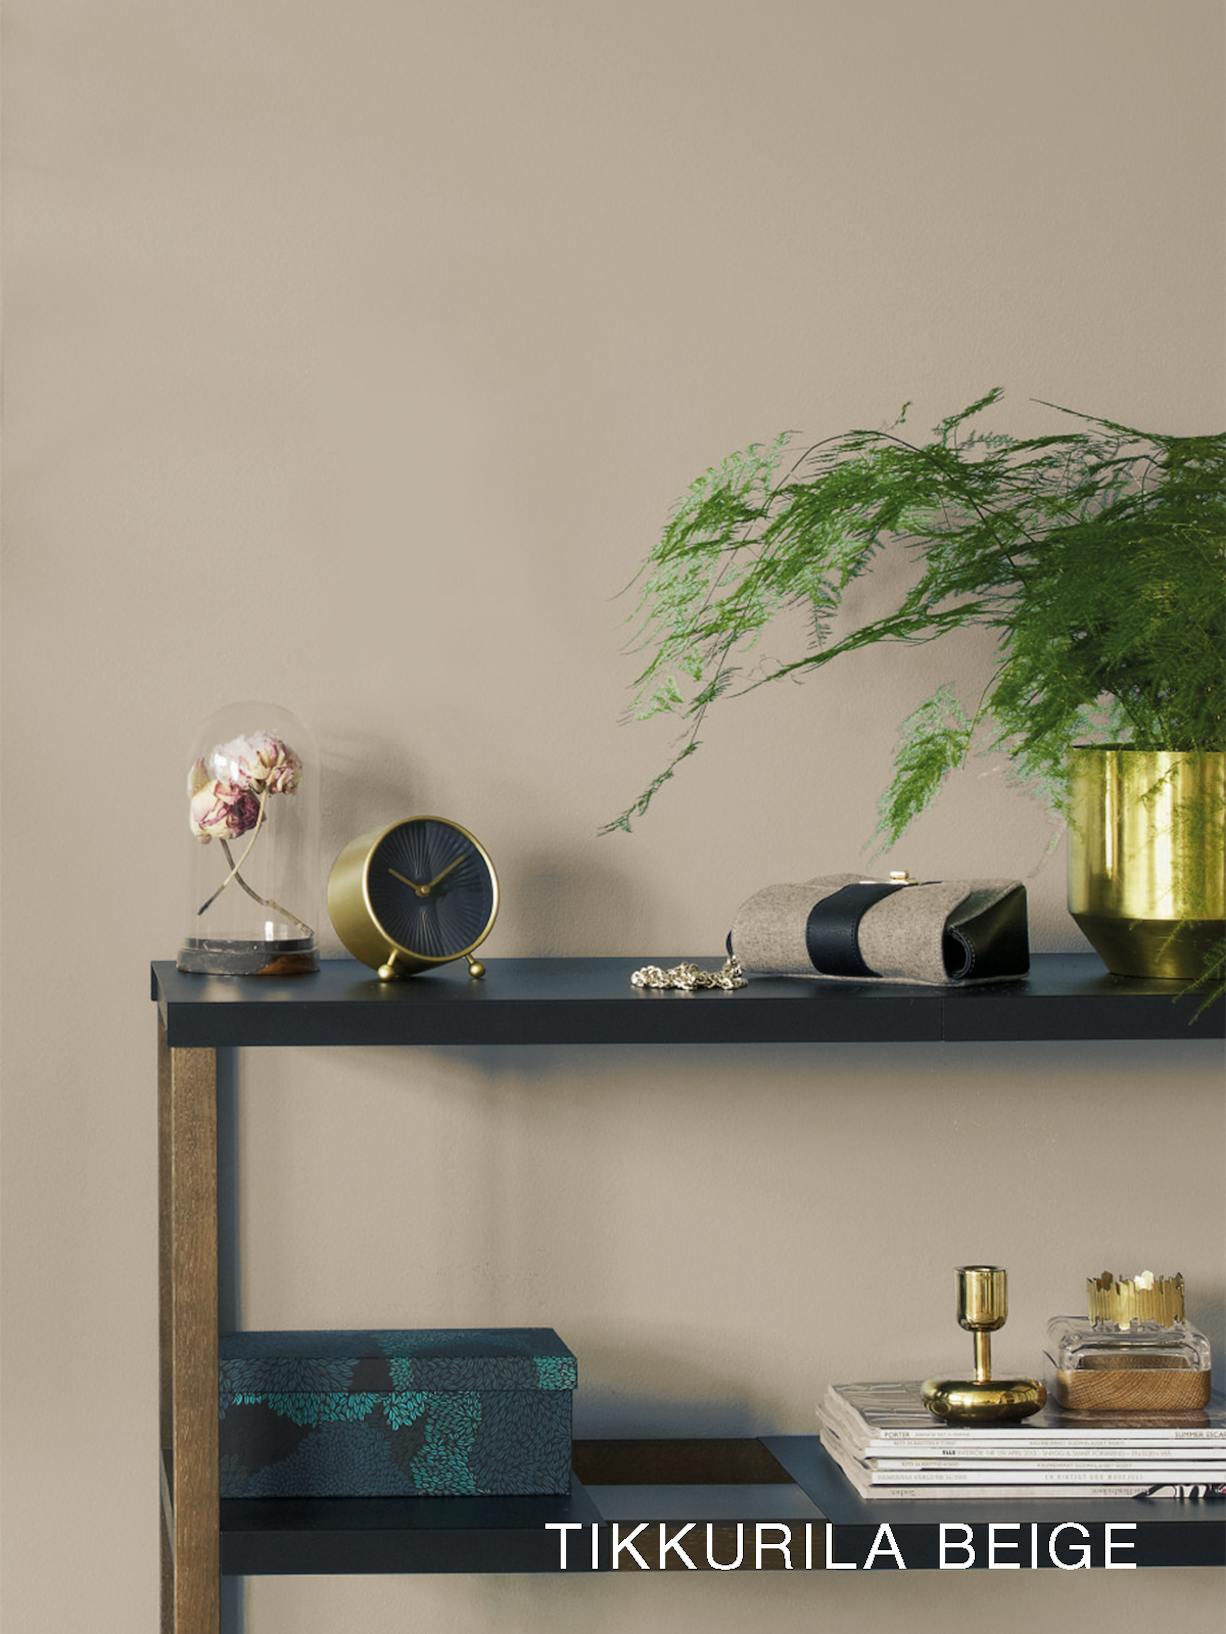 Dark Side Table with Plant in Fold Pot, Clock and Decorations Against Beige Wall